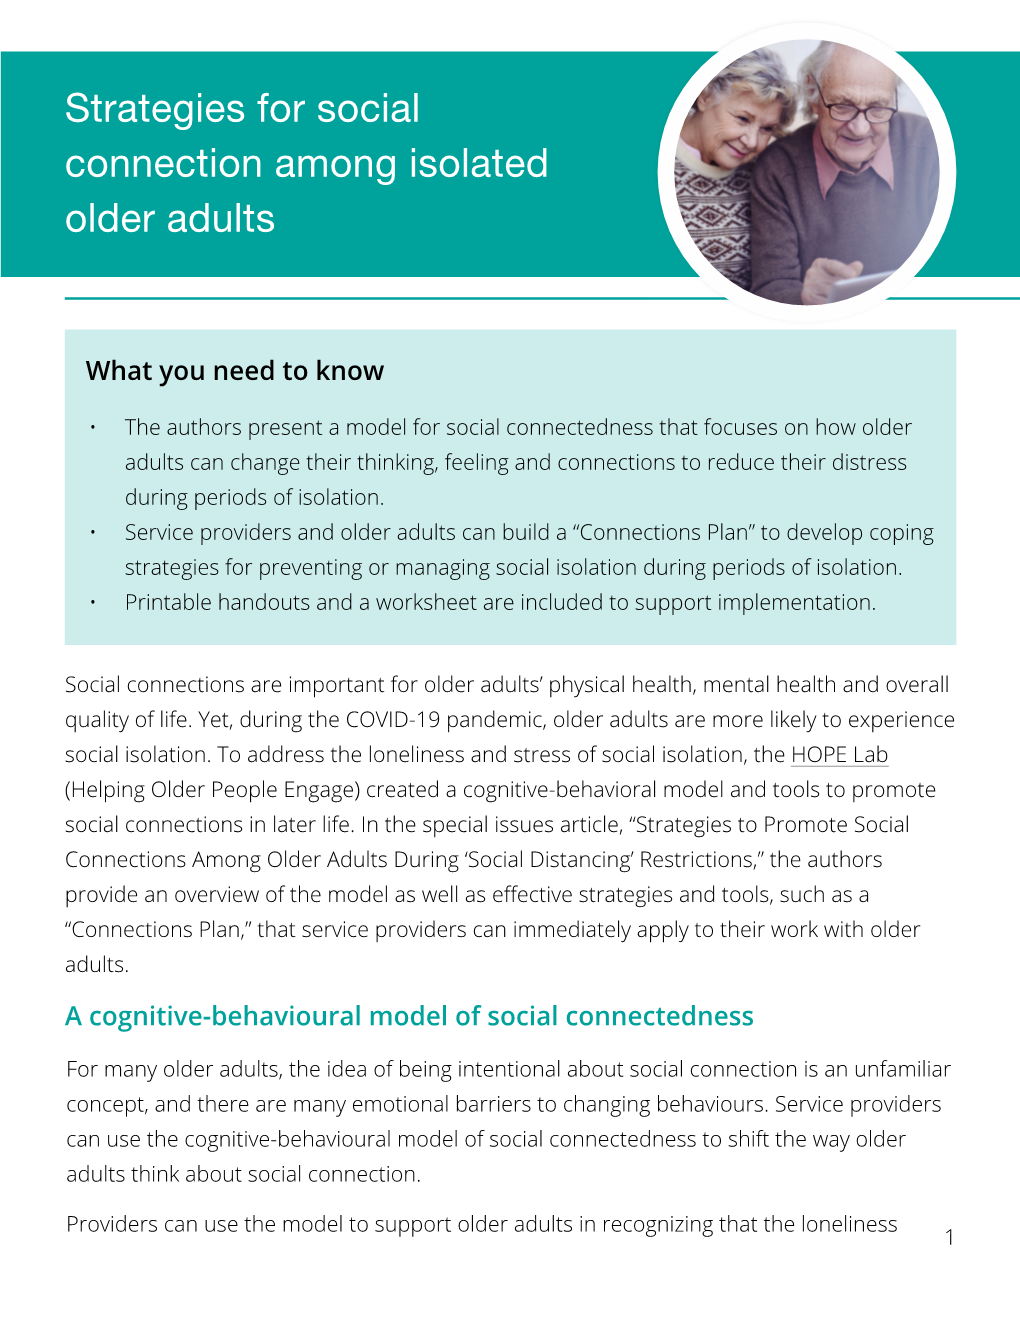 Strategies for Social Connection Among Isolated Older Adults